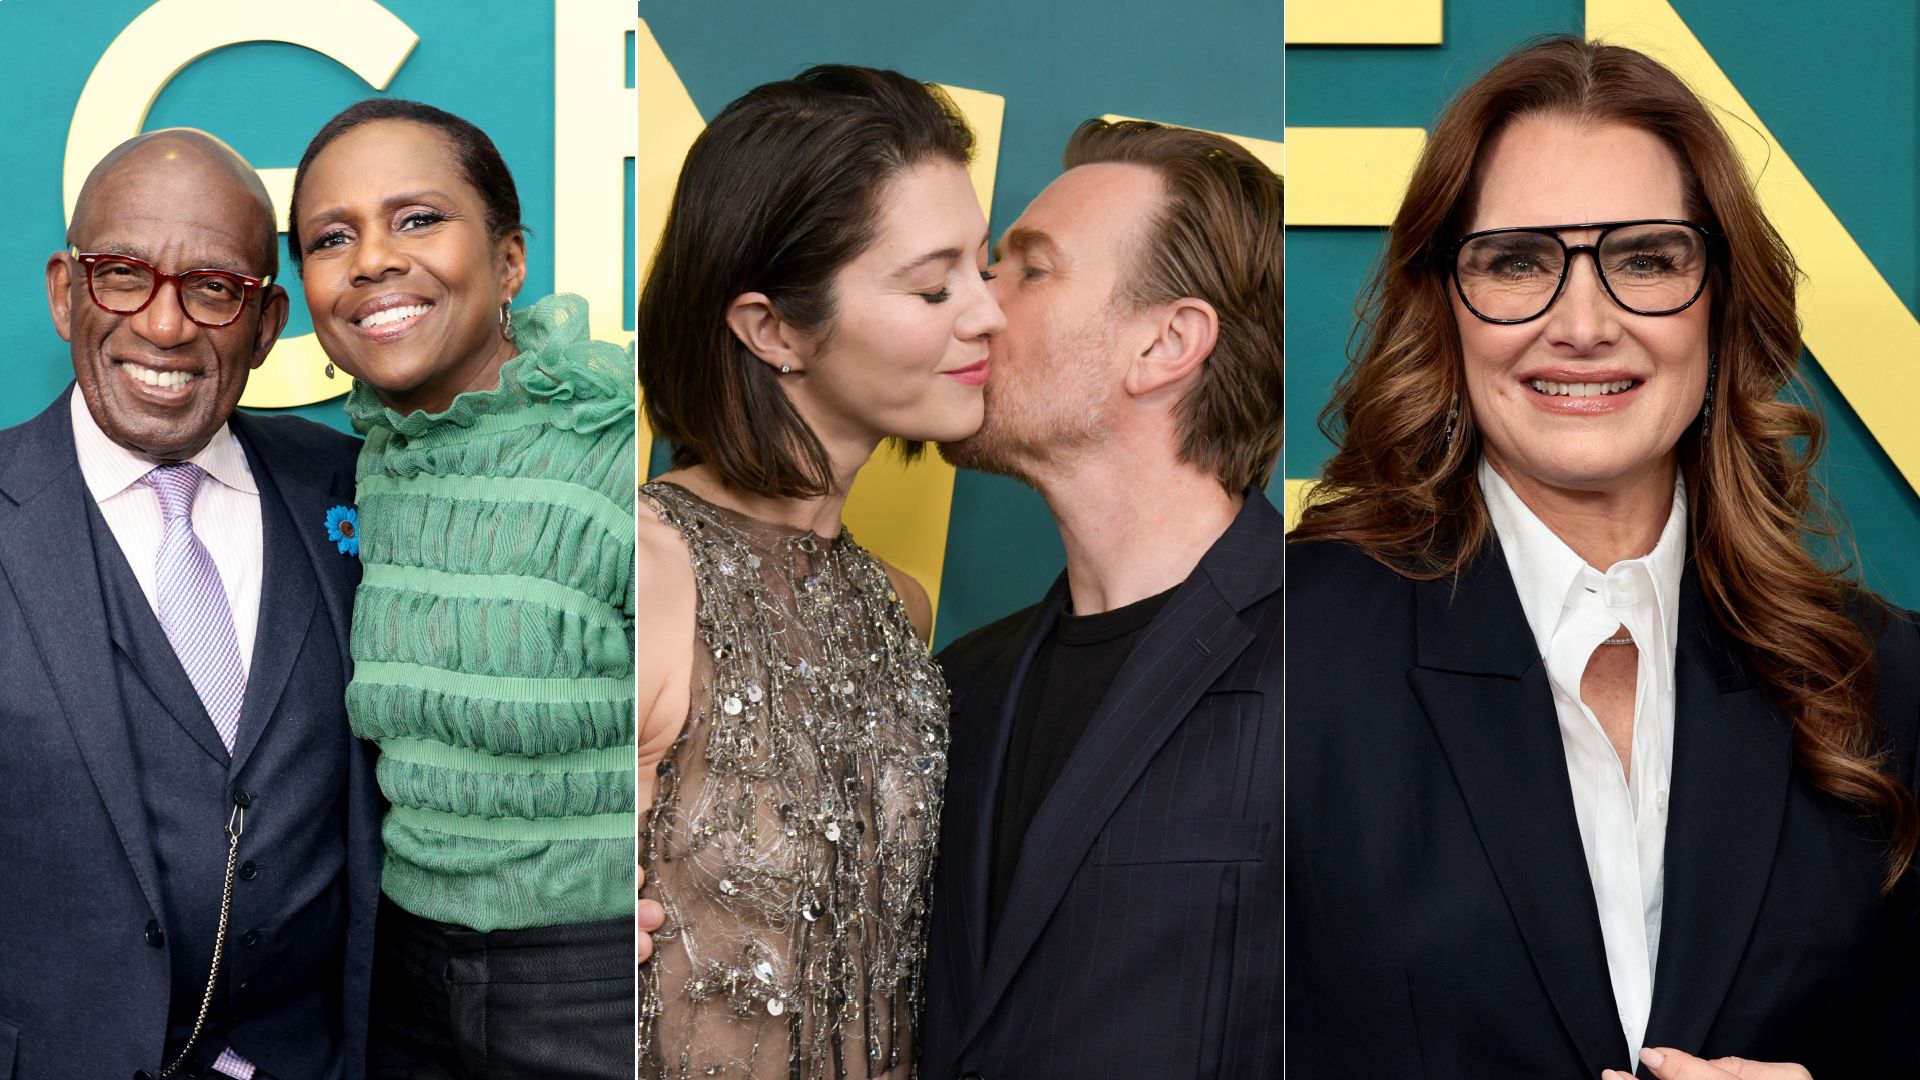 Al Roker, Deborah Roberts, Ewan McGregor, Mary Elizabeth Winstead, and Brooke Shields at the premiere of "A Gentleman in Moscow" in  New York City on March 12